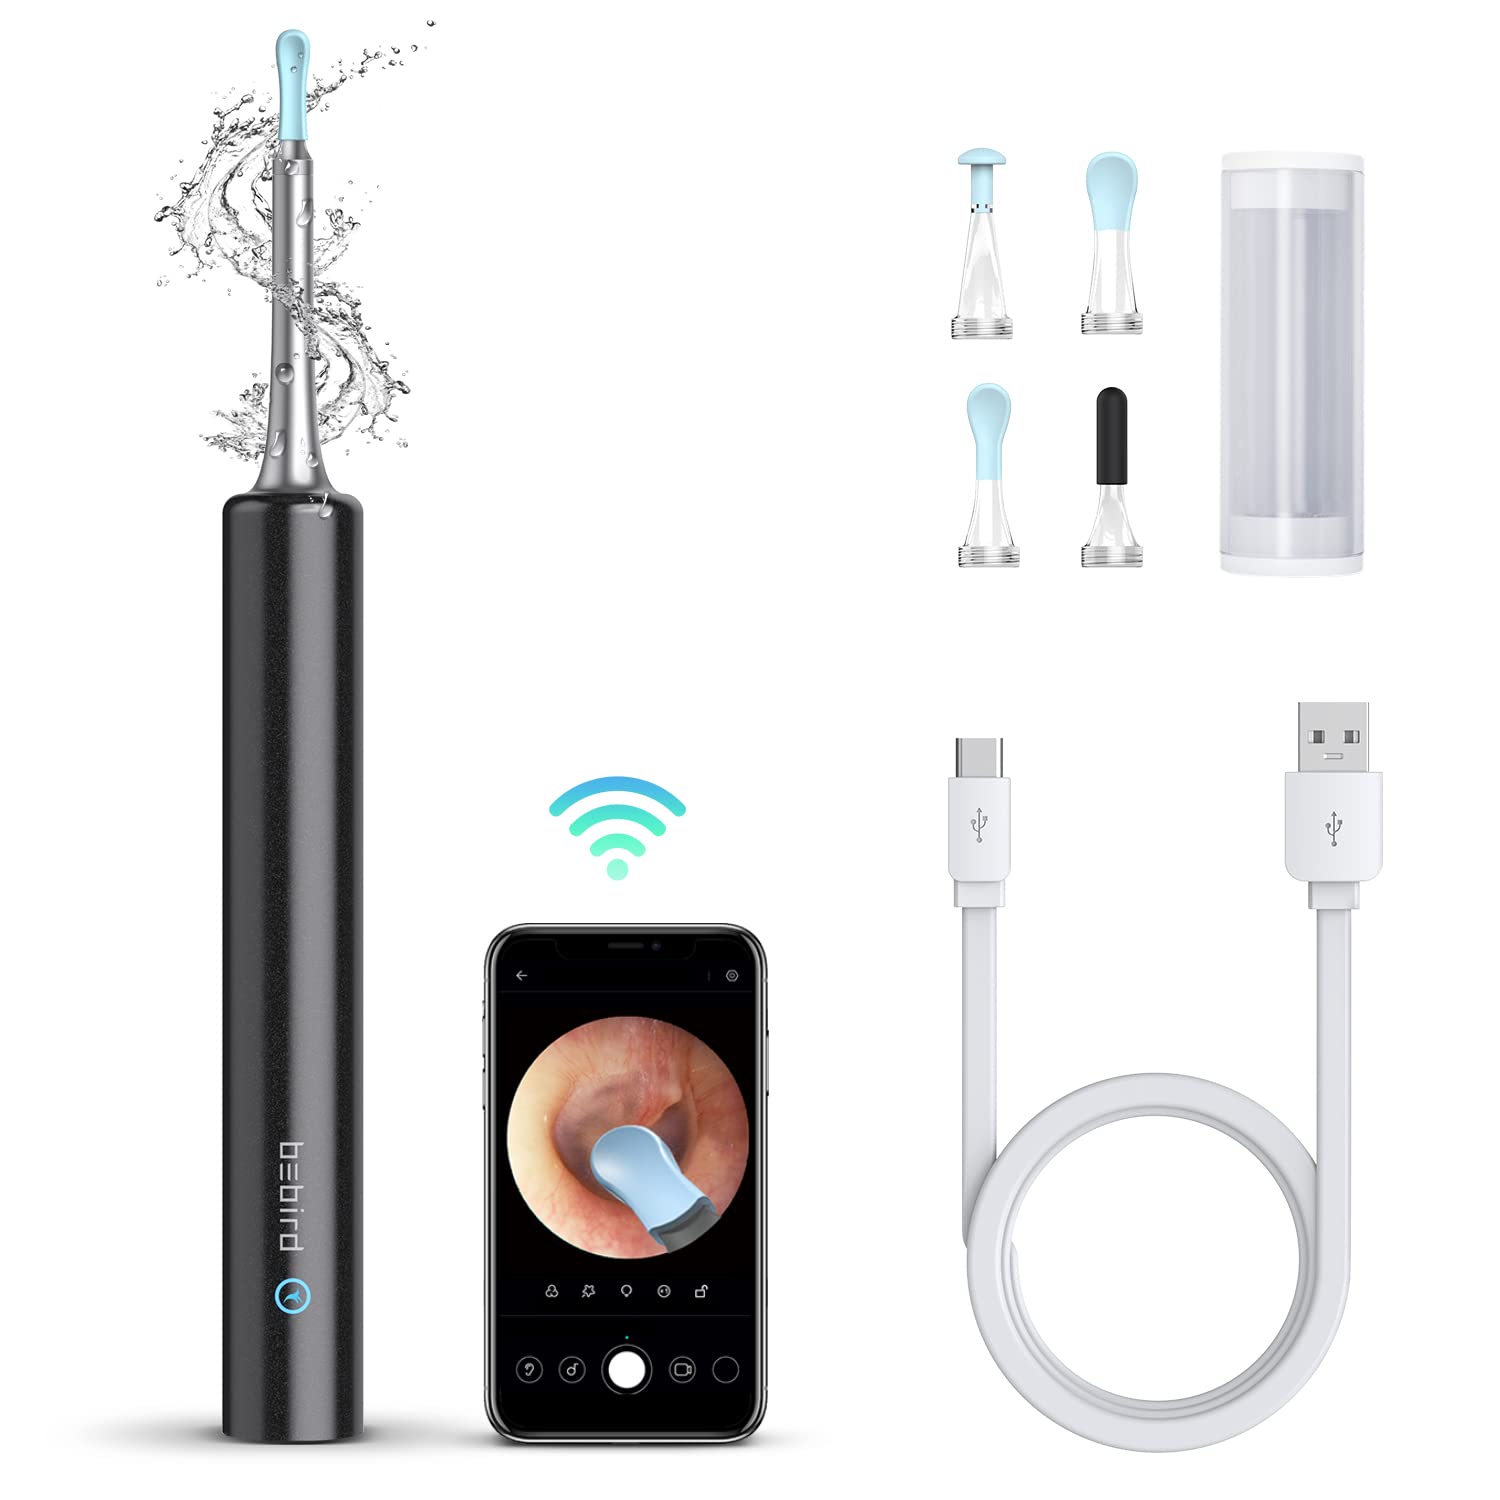 Ear Wax Removal Tool Kit Ear Cleaner With Camera, WIFI Ear Cleaning With  Camera Wired Ear Pick Earwax Removal Kit For Kids Adults Otoscope,Visual  Ear